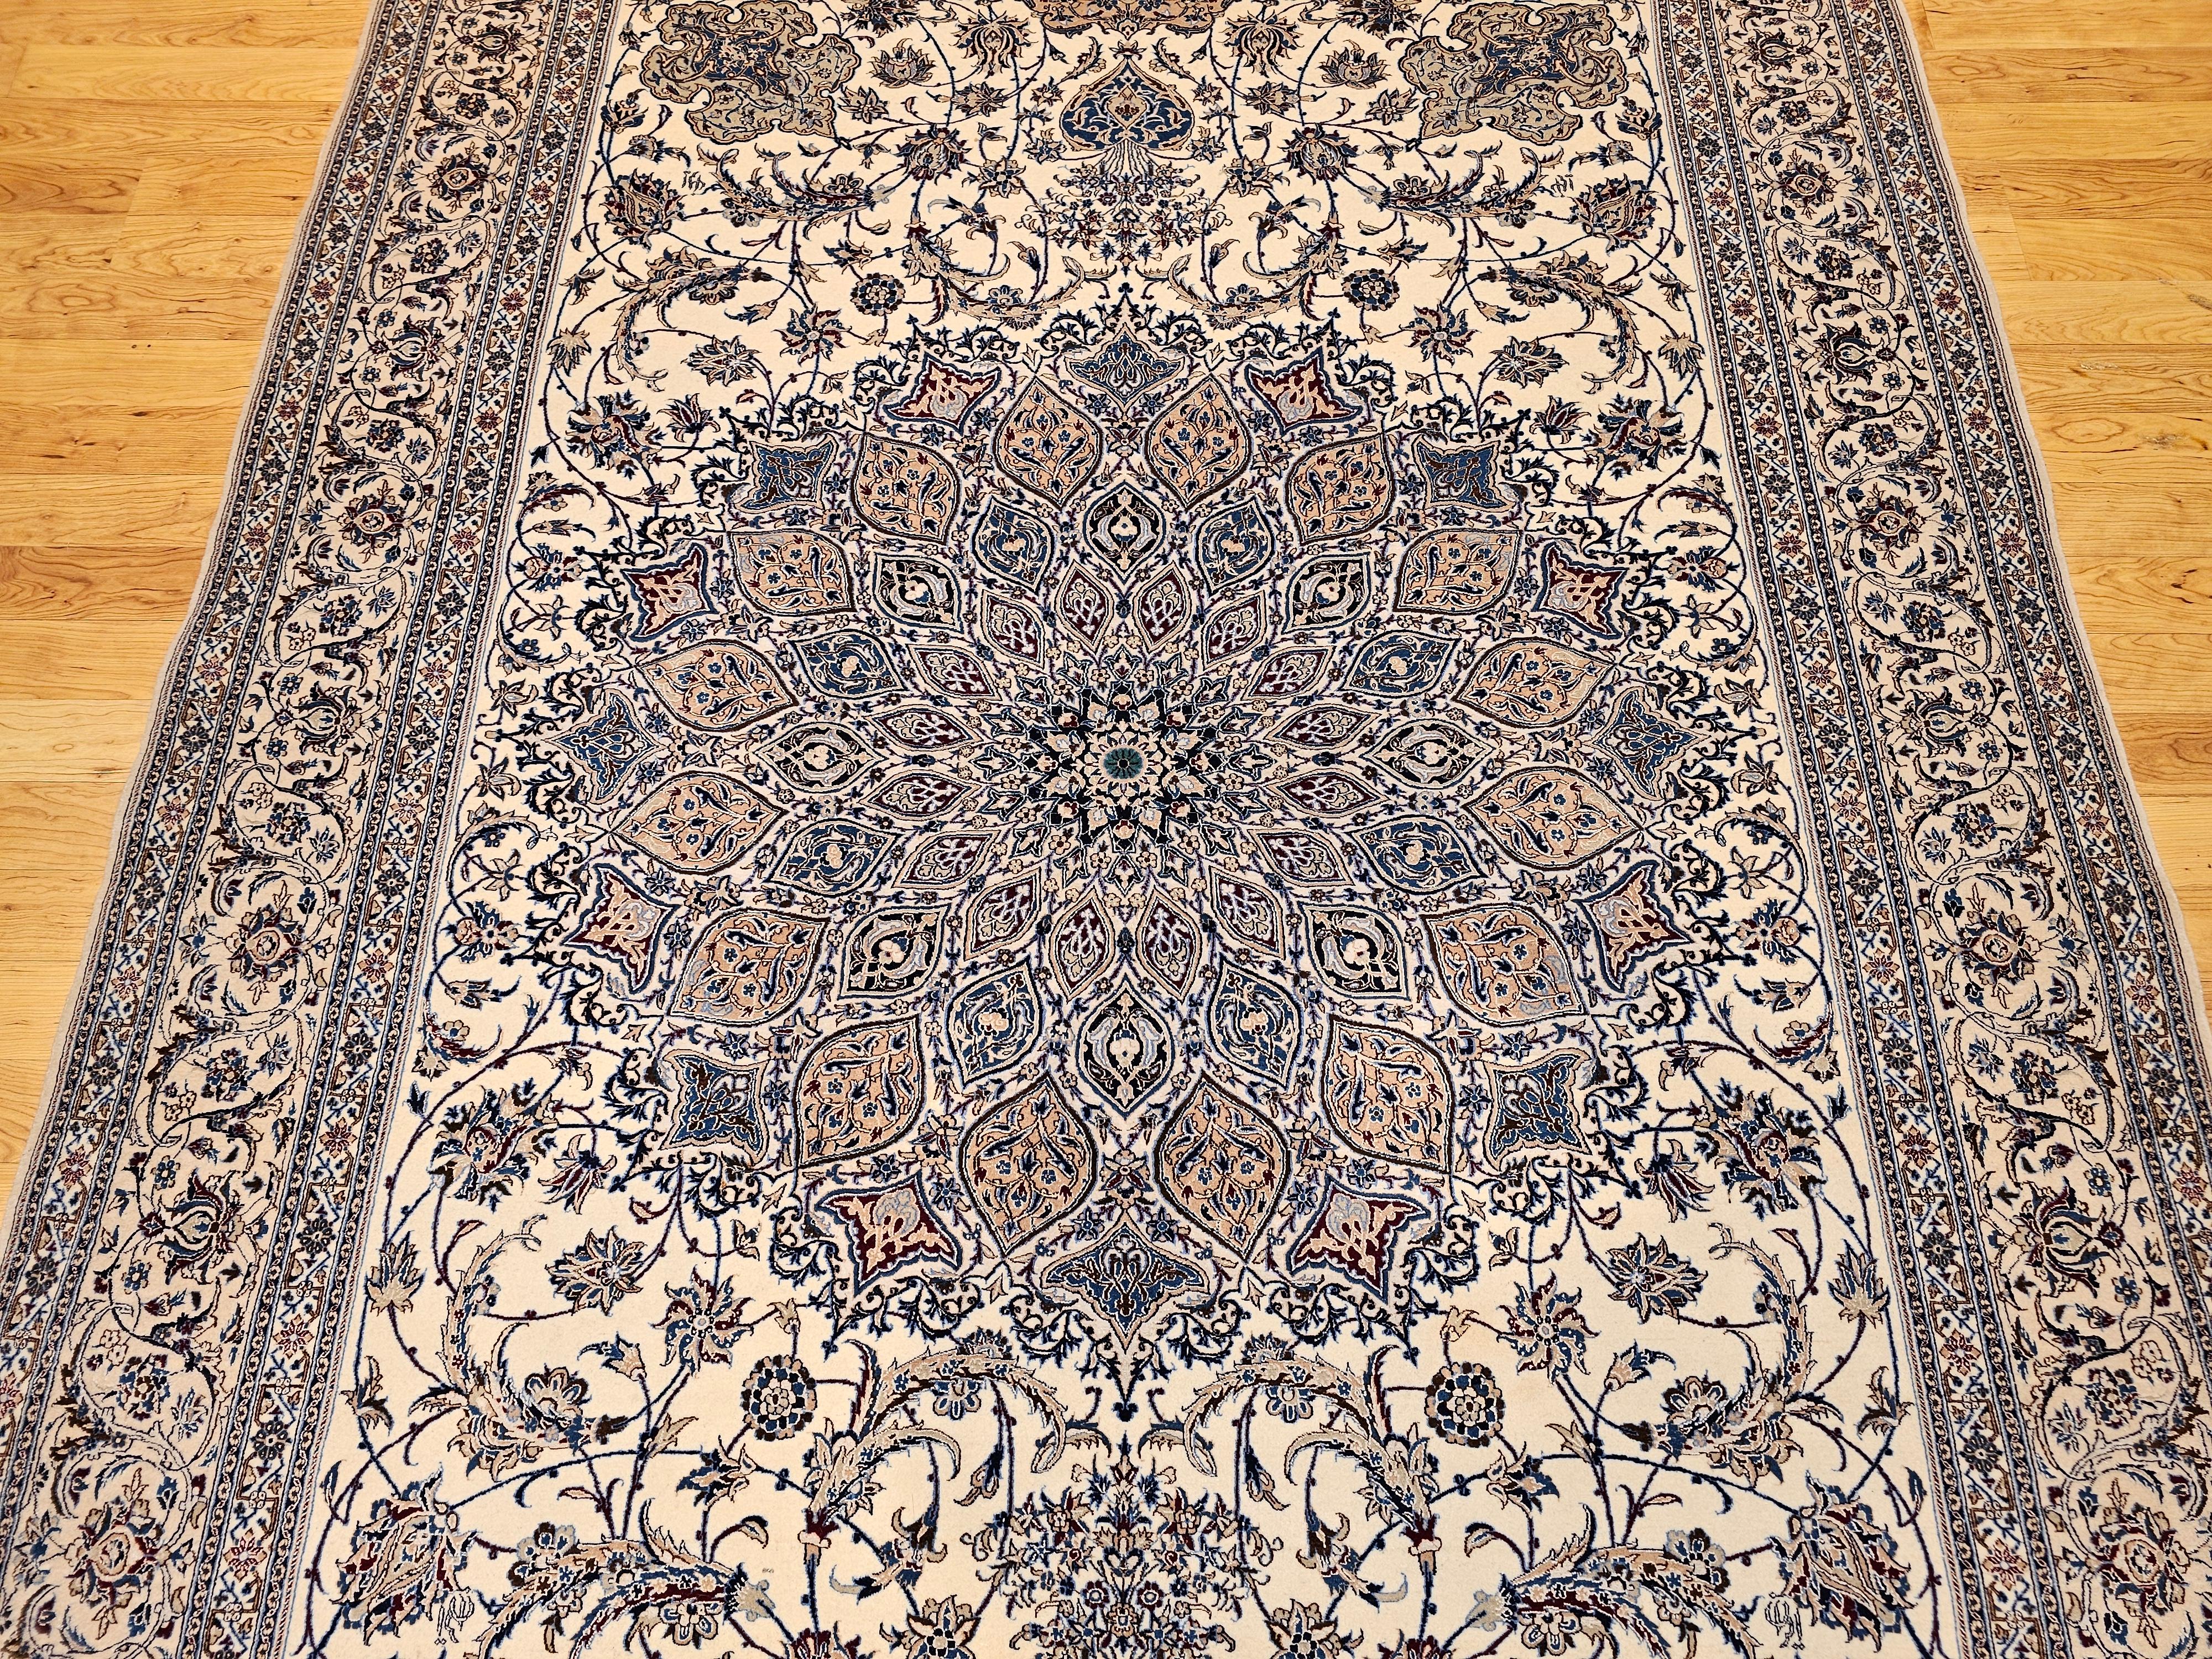 Extra Fine Weave Persian Nain in Floral Pattern in Ivory, Blue, Camel, Navy, Tan In Good Condition For Sale In Barrington, IL